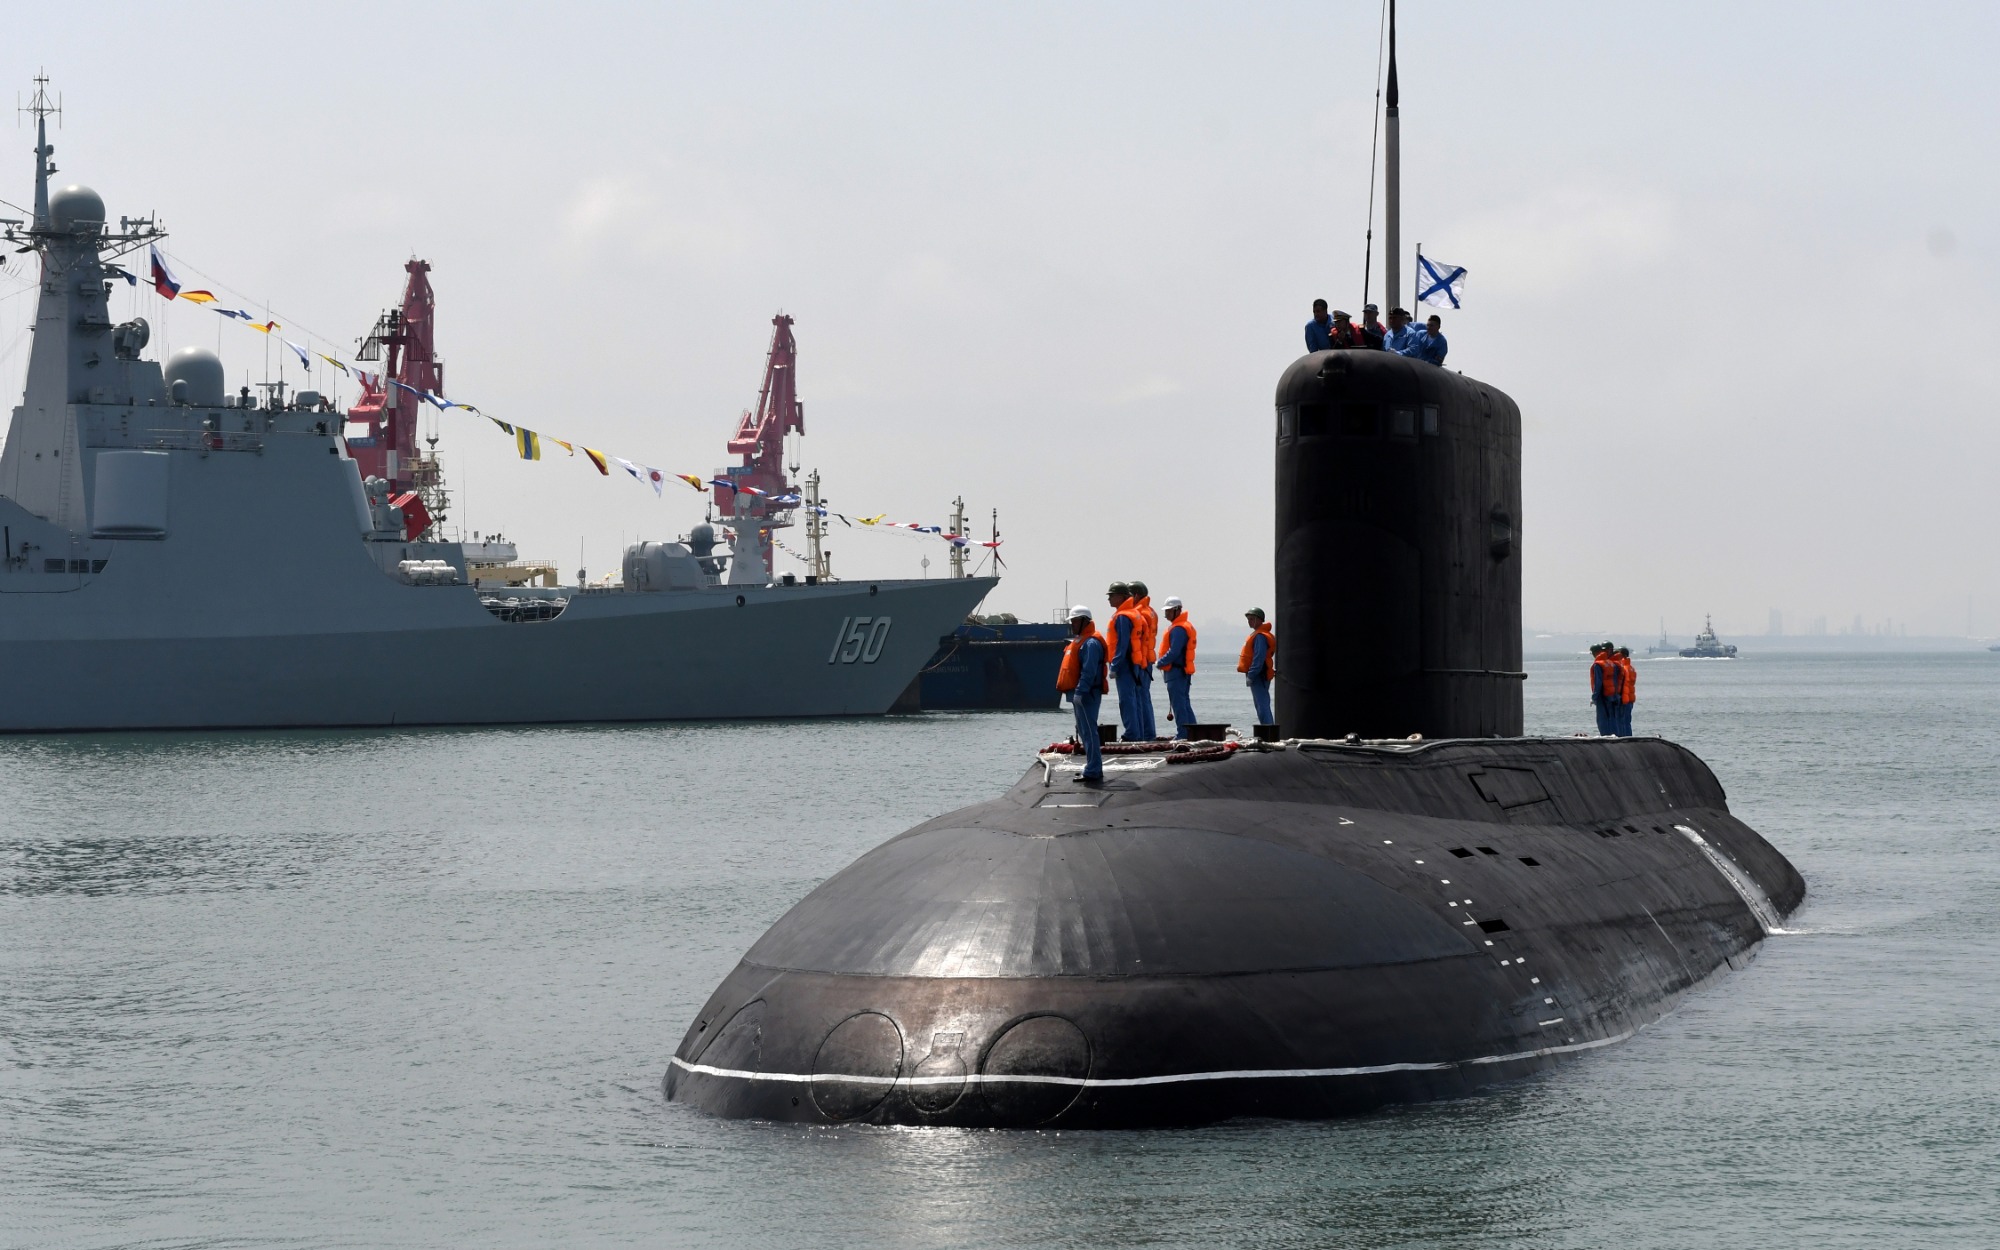 Russian Submarines Could Be Tampering With Undersea Cables That Make